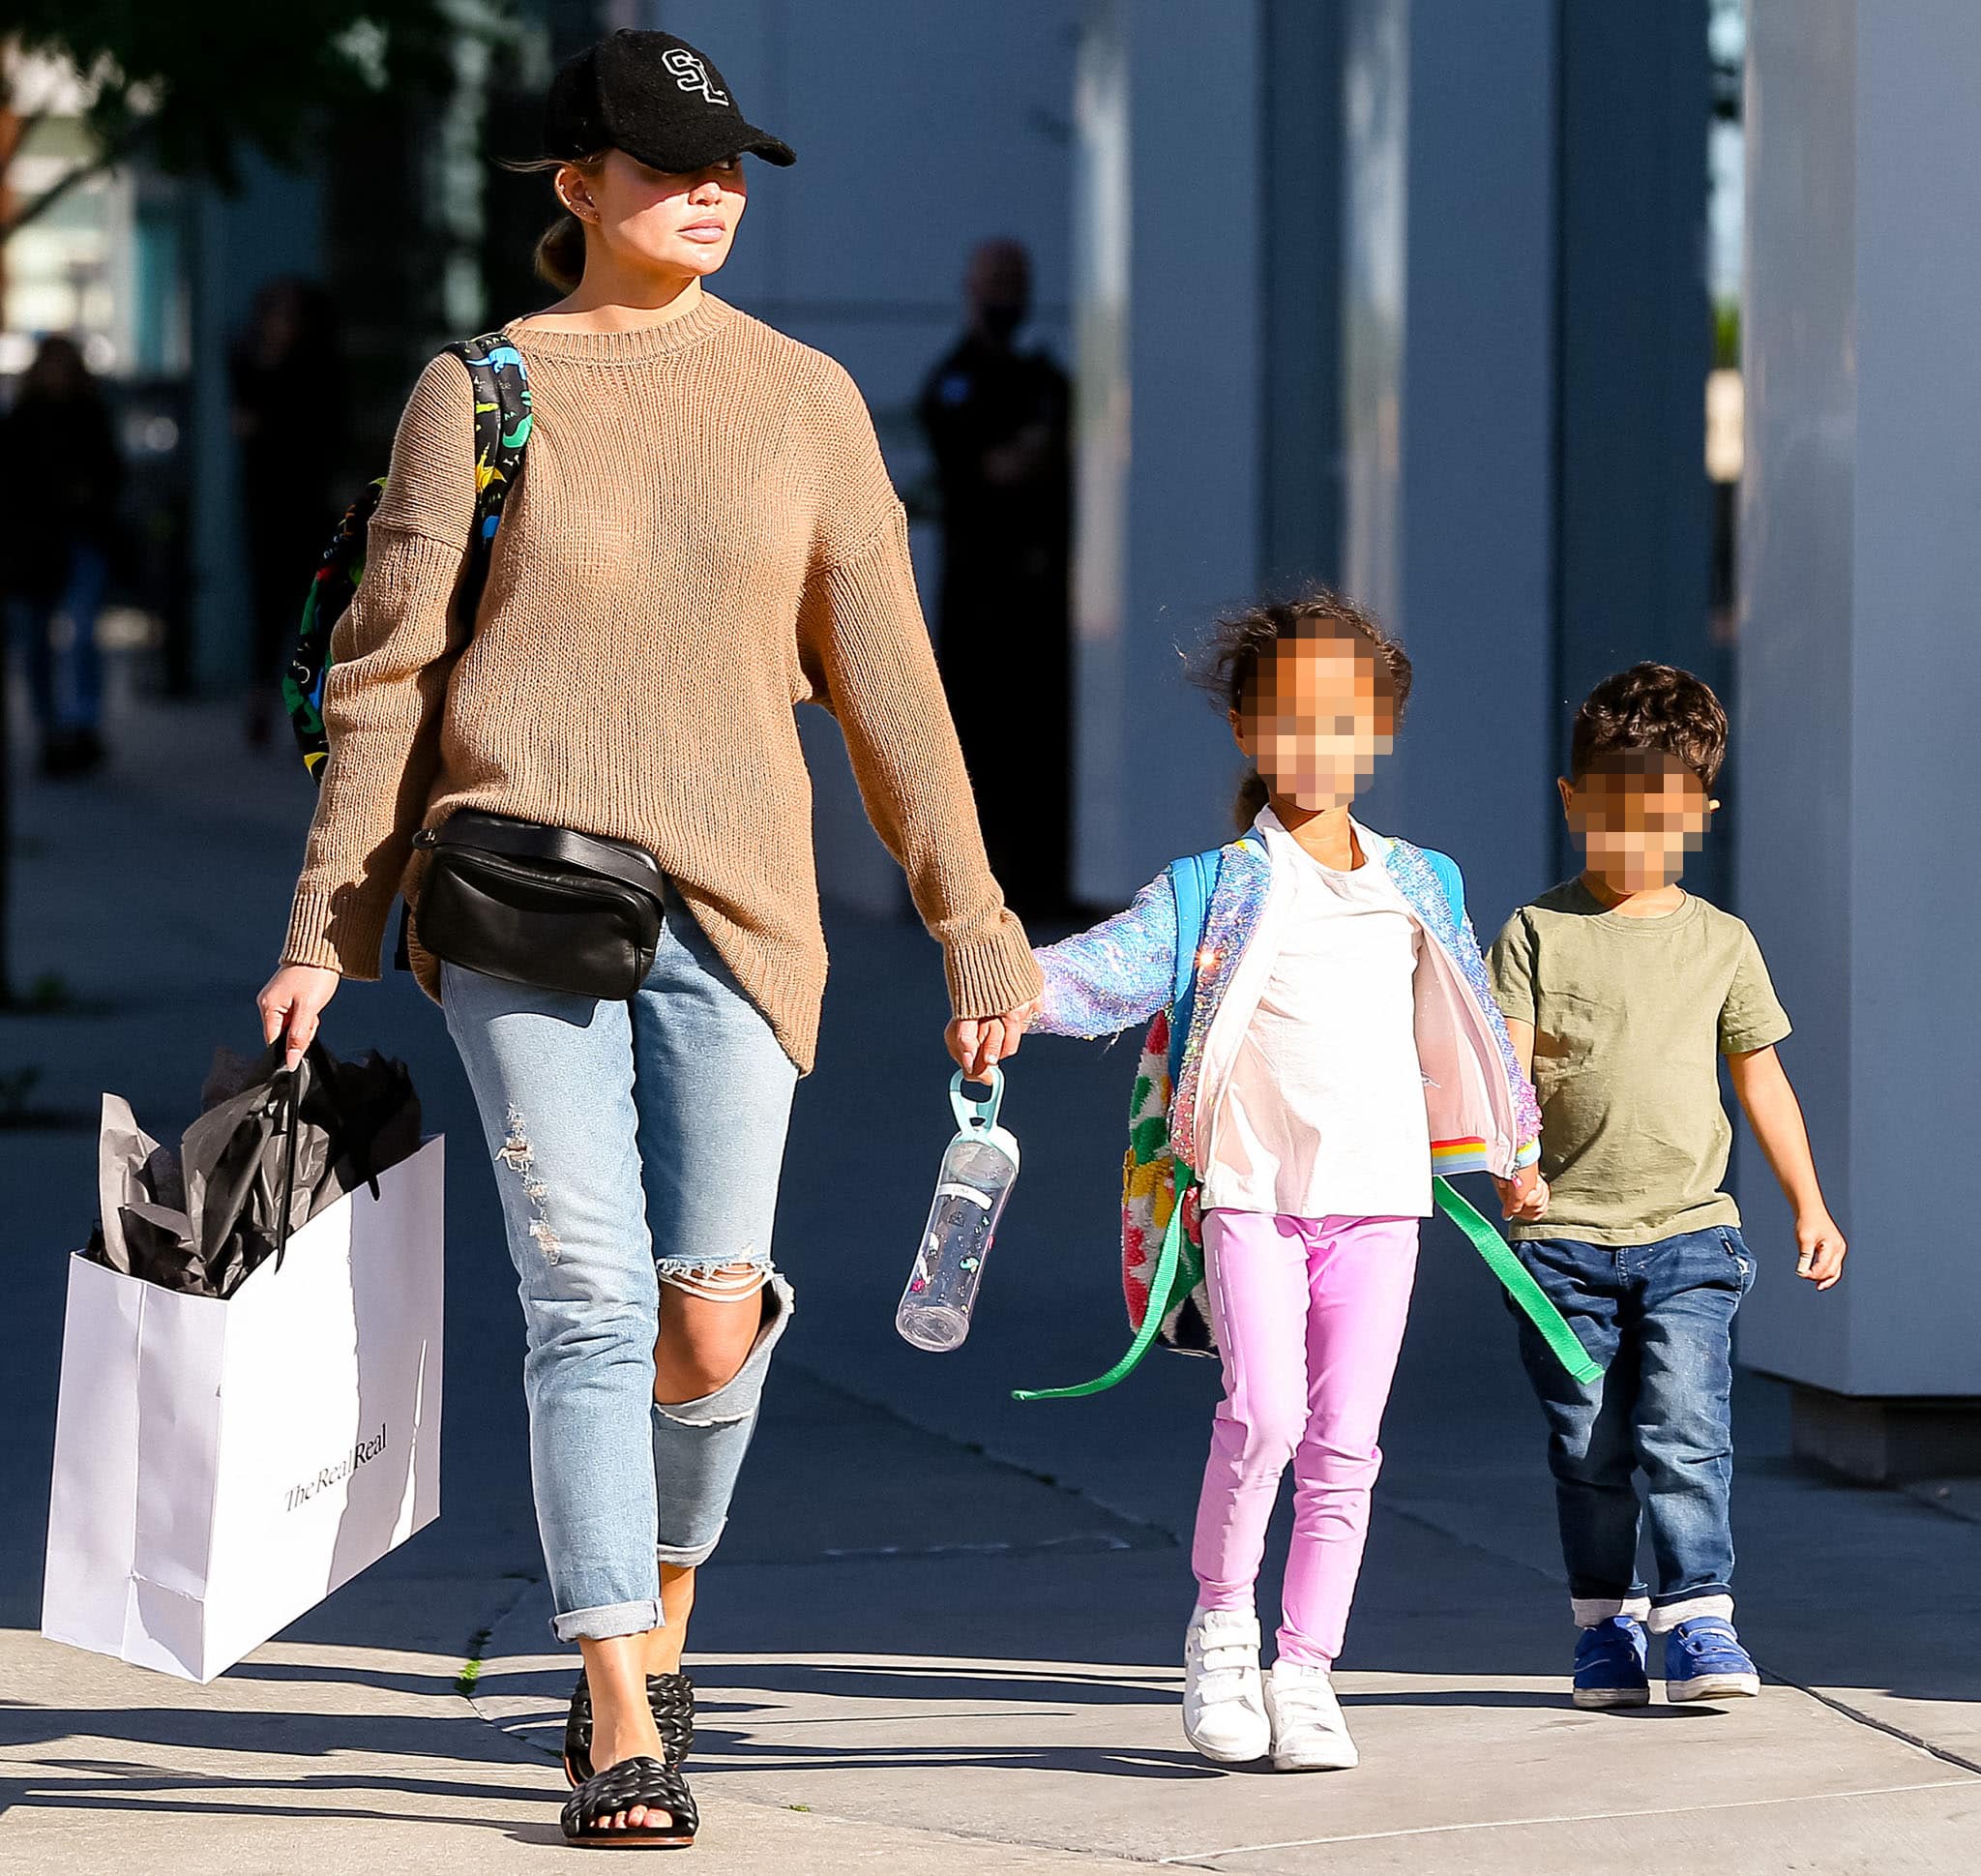 Chrissy Teigen goes shopping with her kids, Luna and Miles, in West Hollywood on February 16, 2022